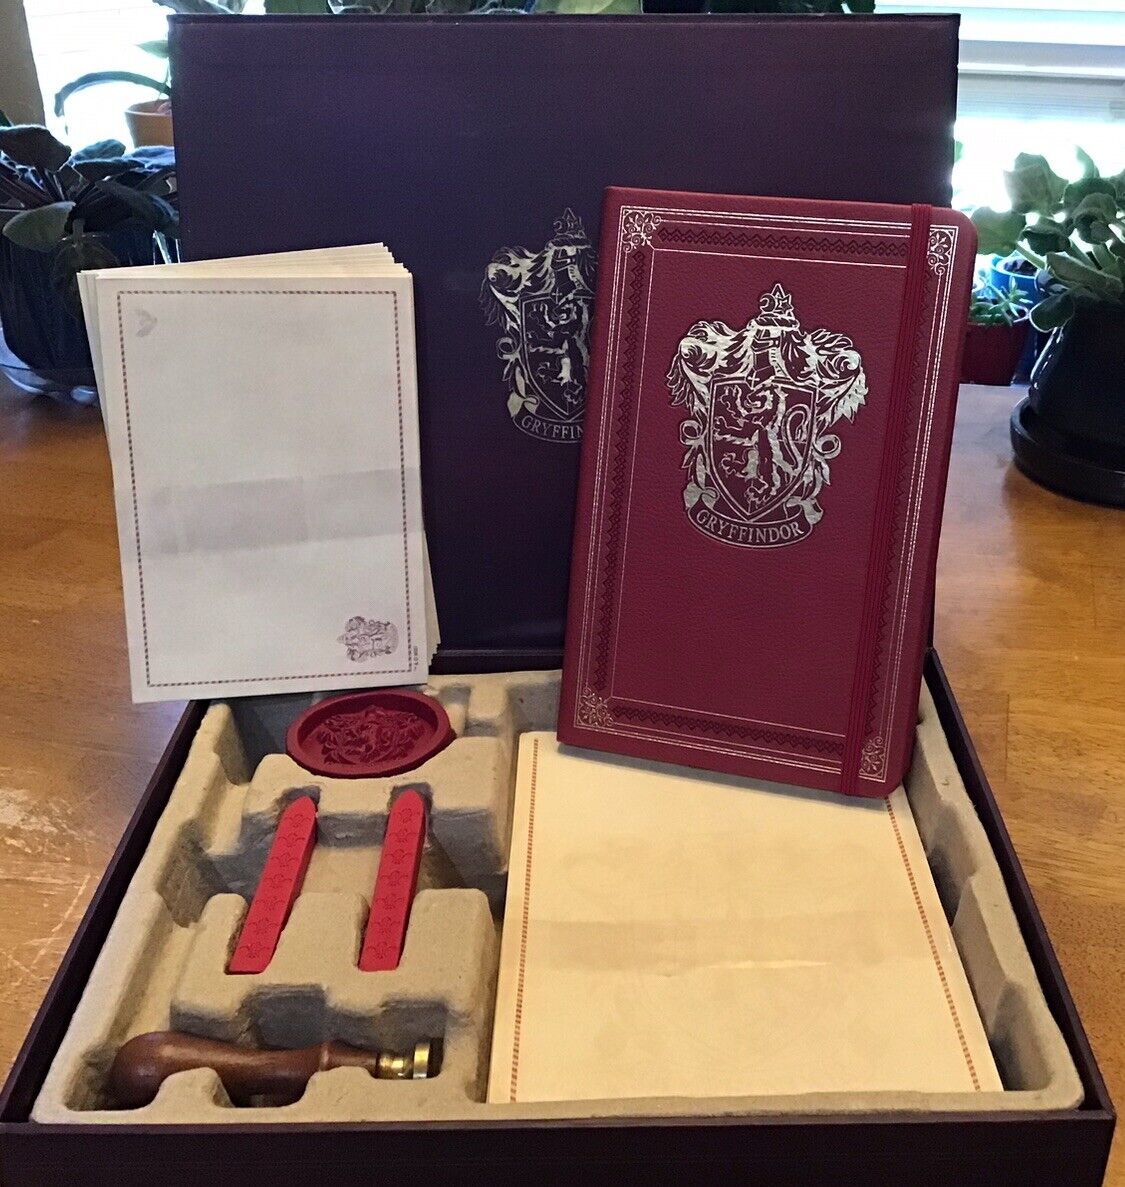 Rare 2016 Harry Potter Gryffindor Journal Wax Seal Very Good condition